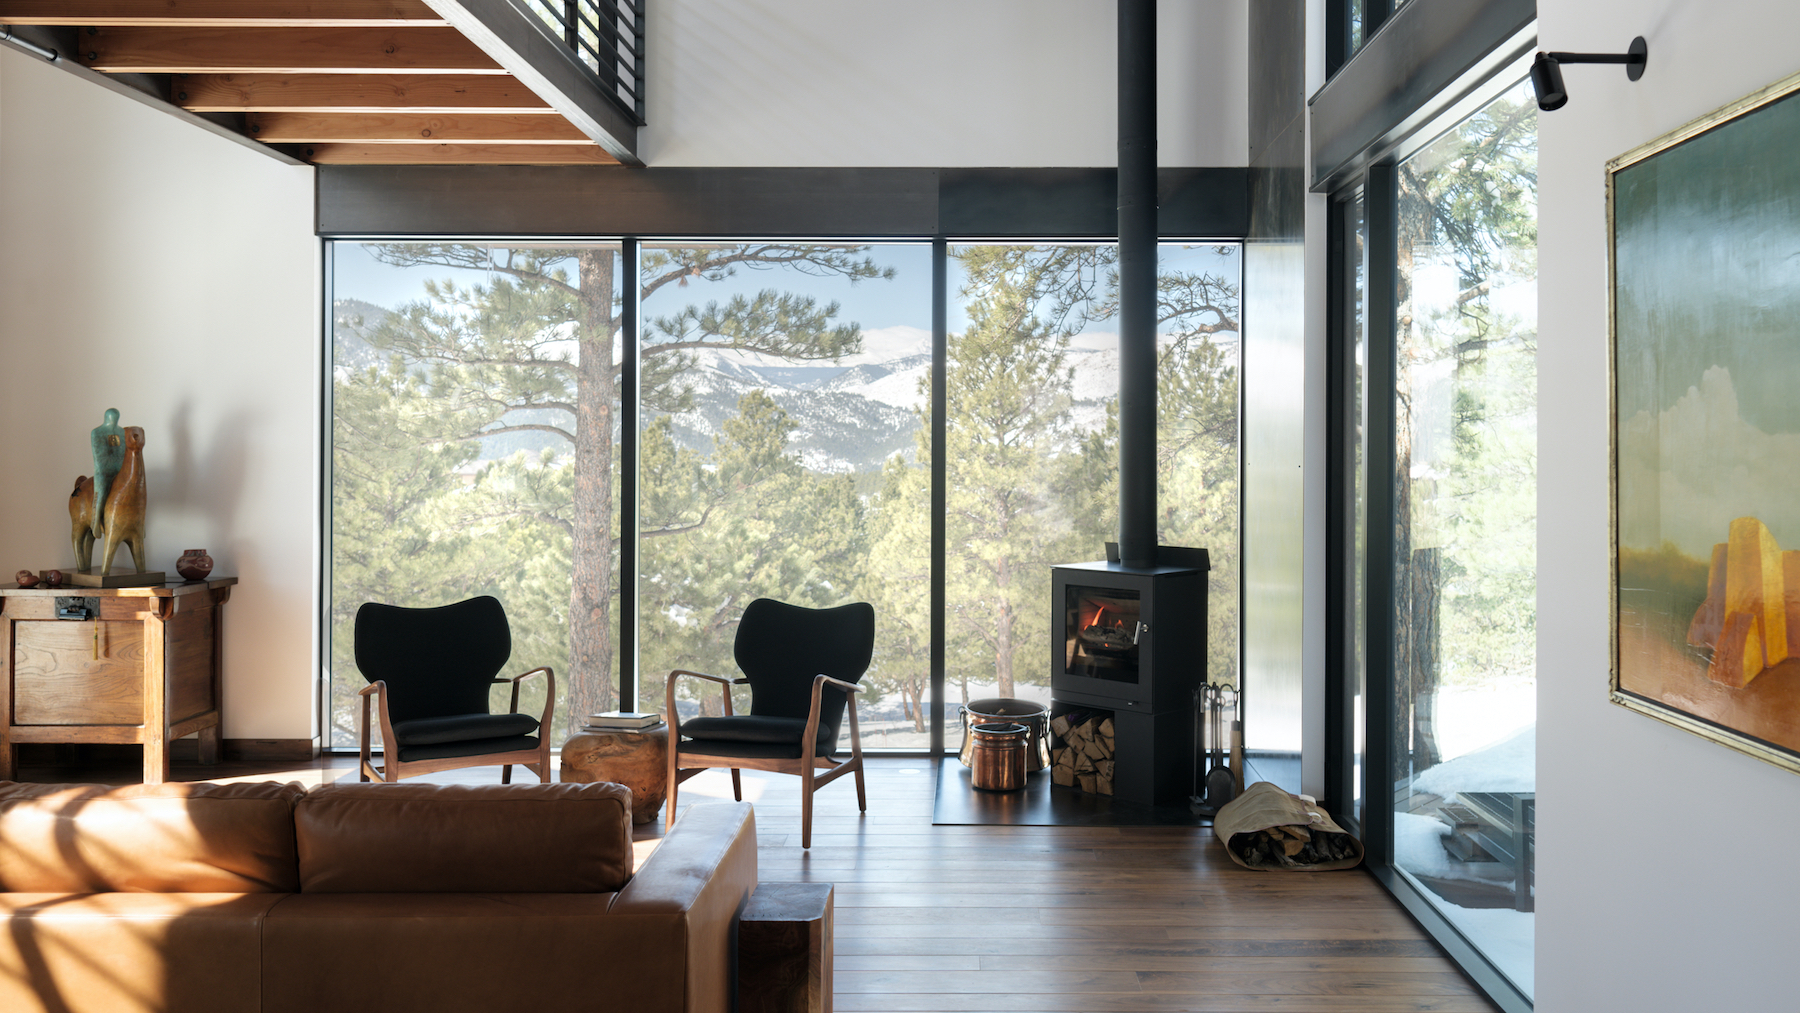 Goatbarn Lane - living room with viewing platform overhead, view of snow capped Rocky Mountain peaks